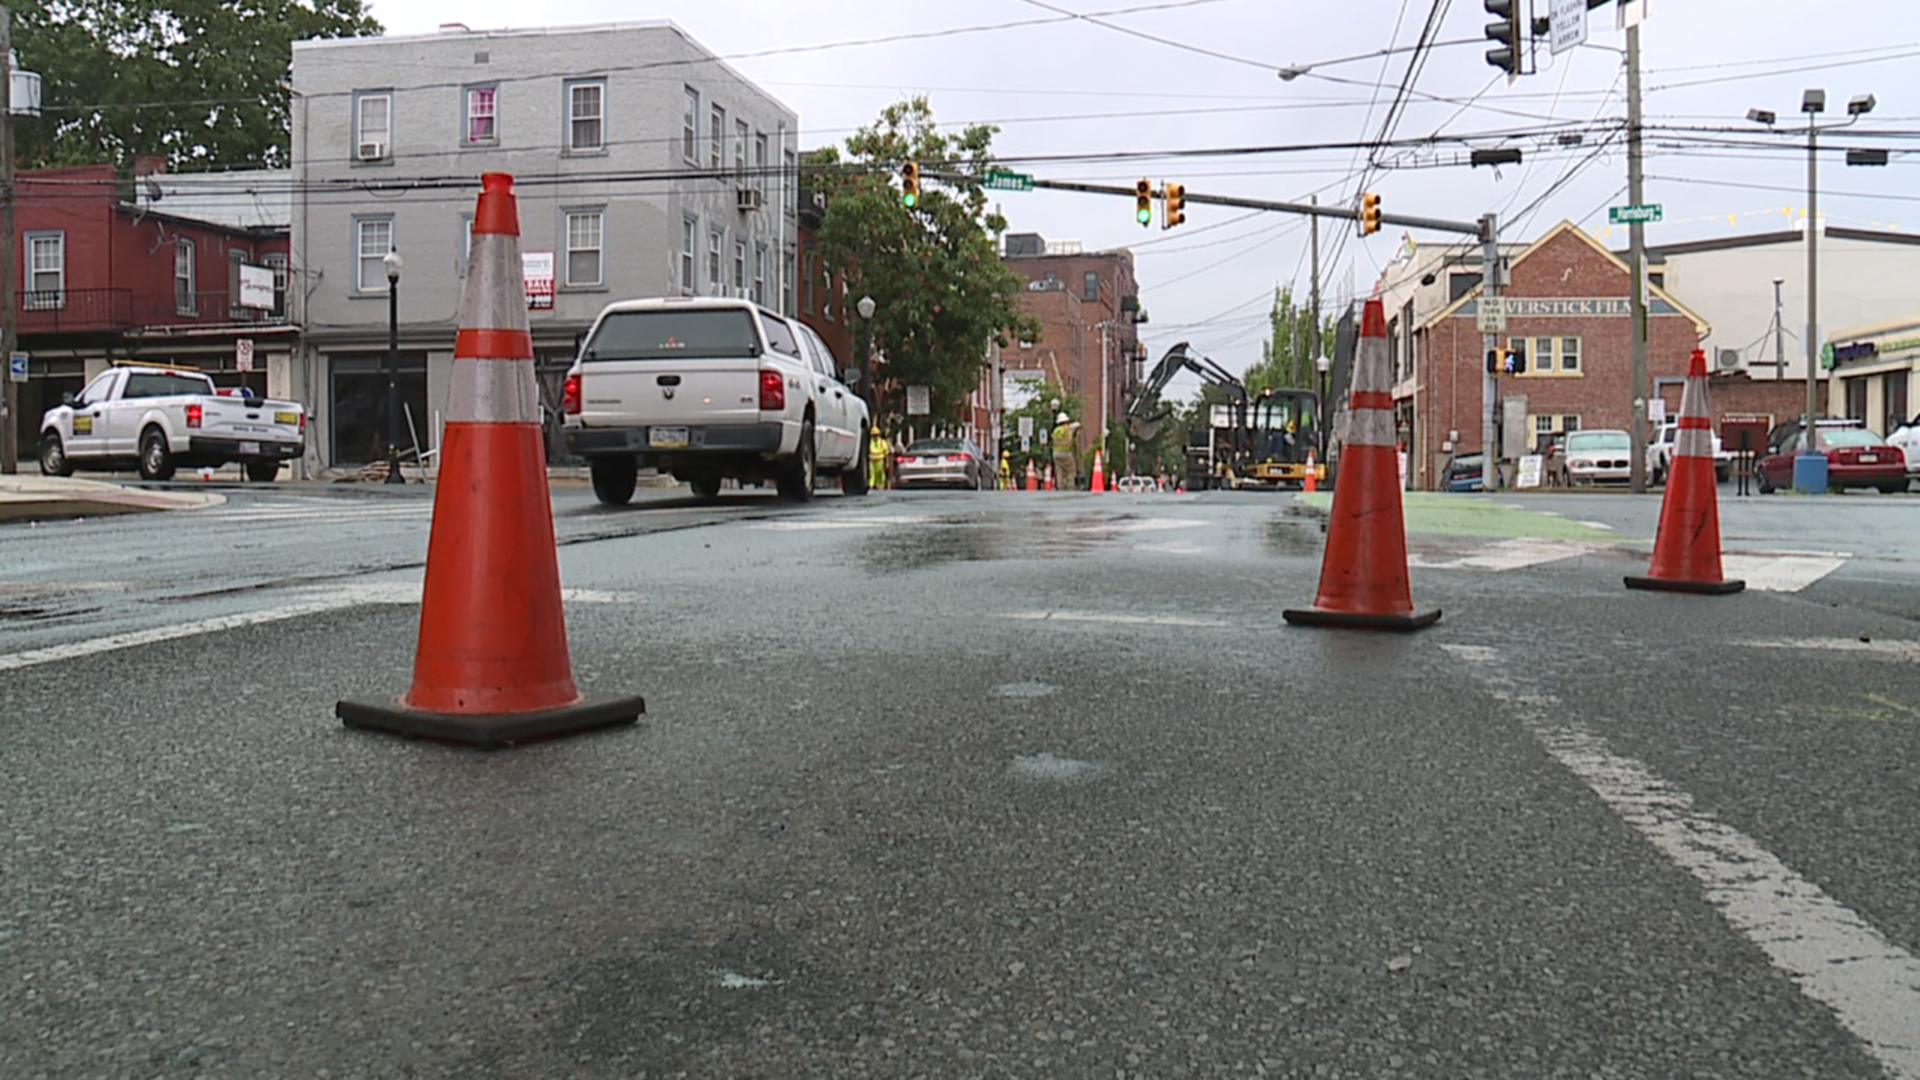 "Please try to be patient," said Steve Campbell, Director of Public Works. "It's good infrastructure we're getting done. It is necessary infrastructure."